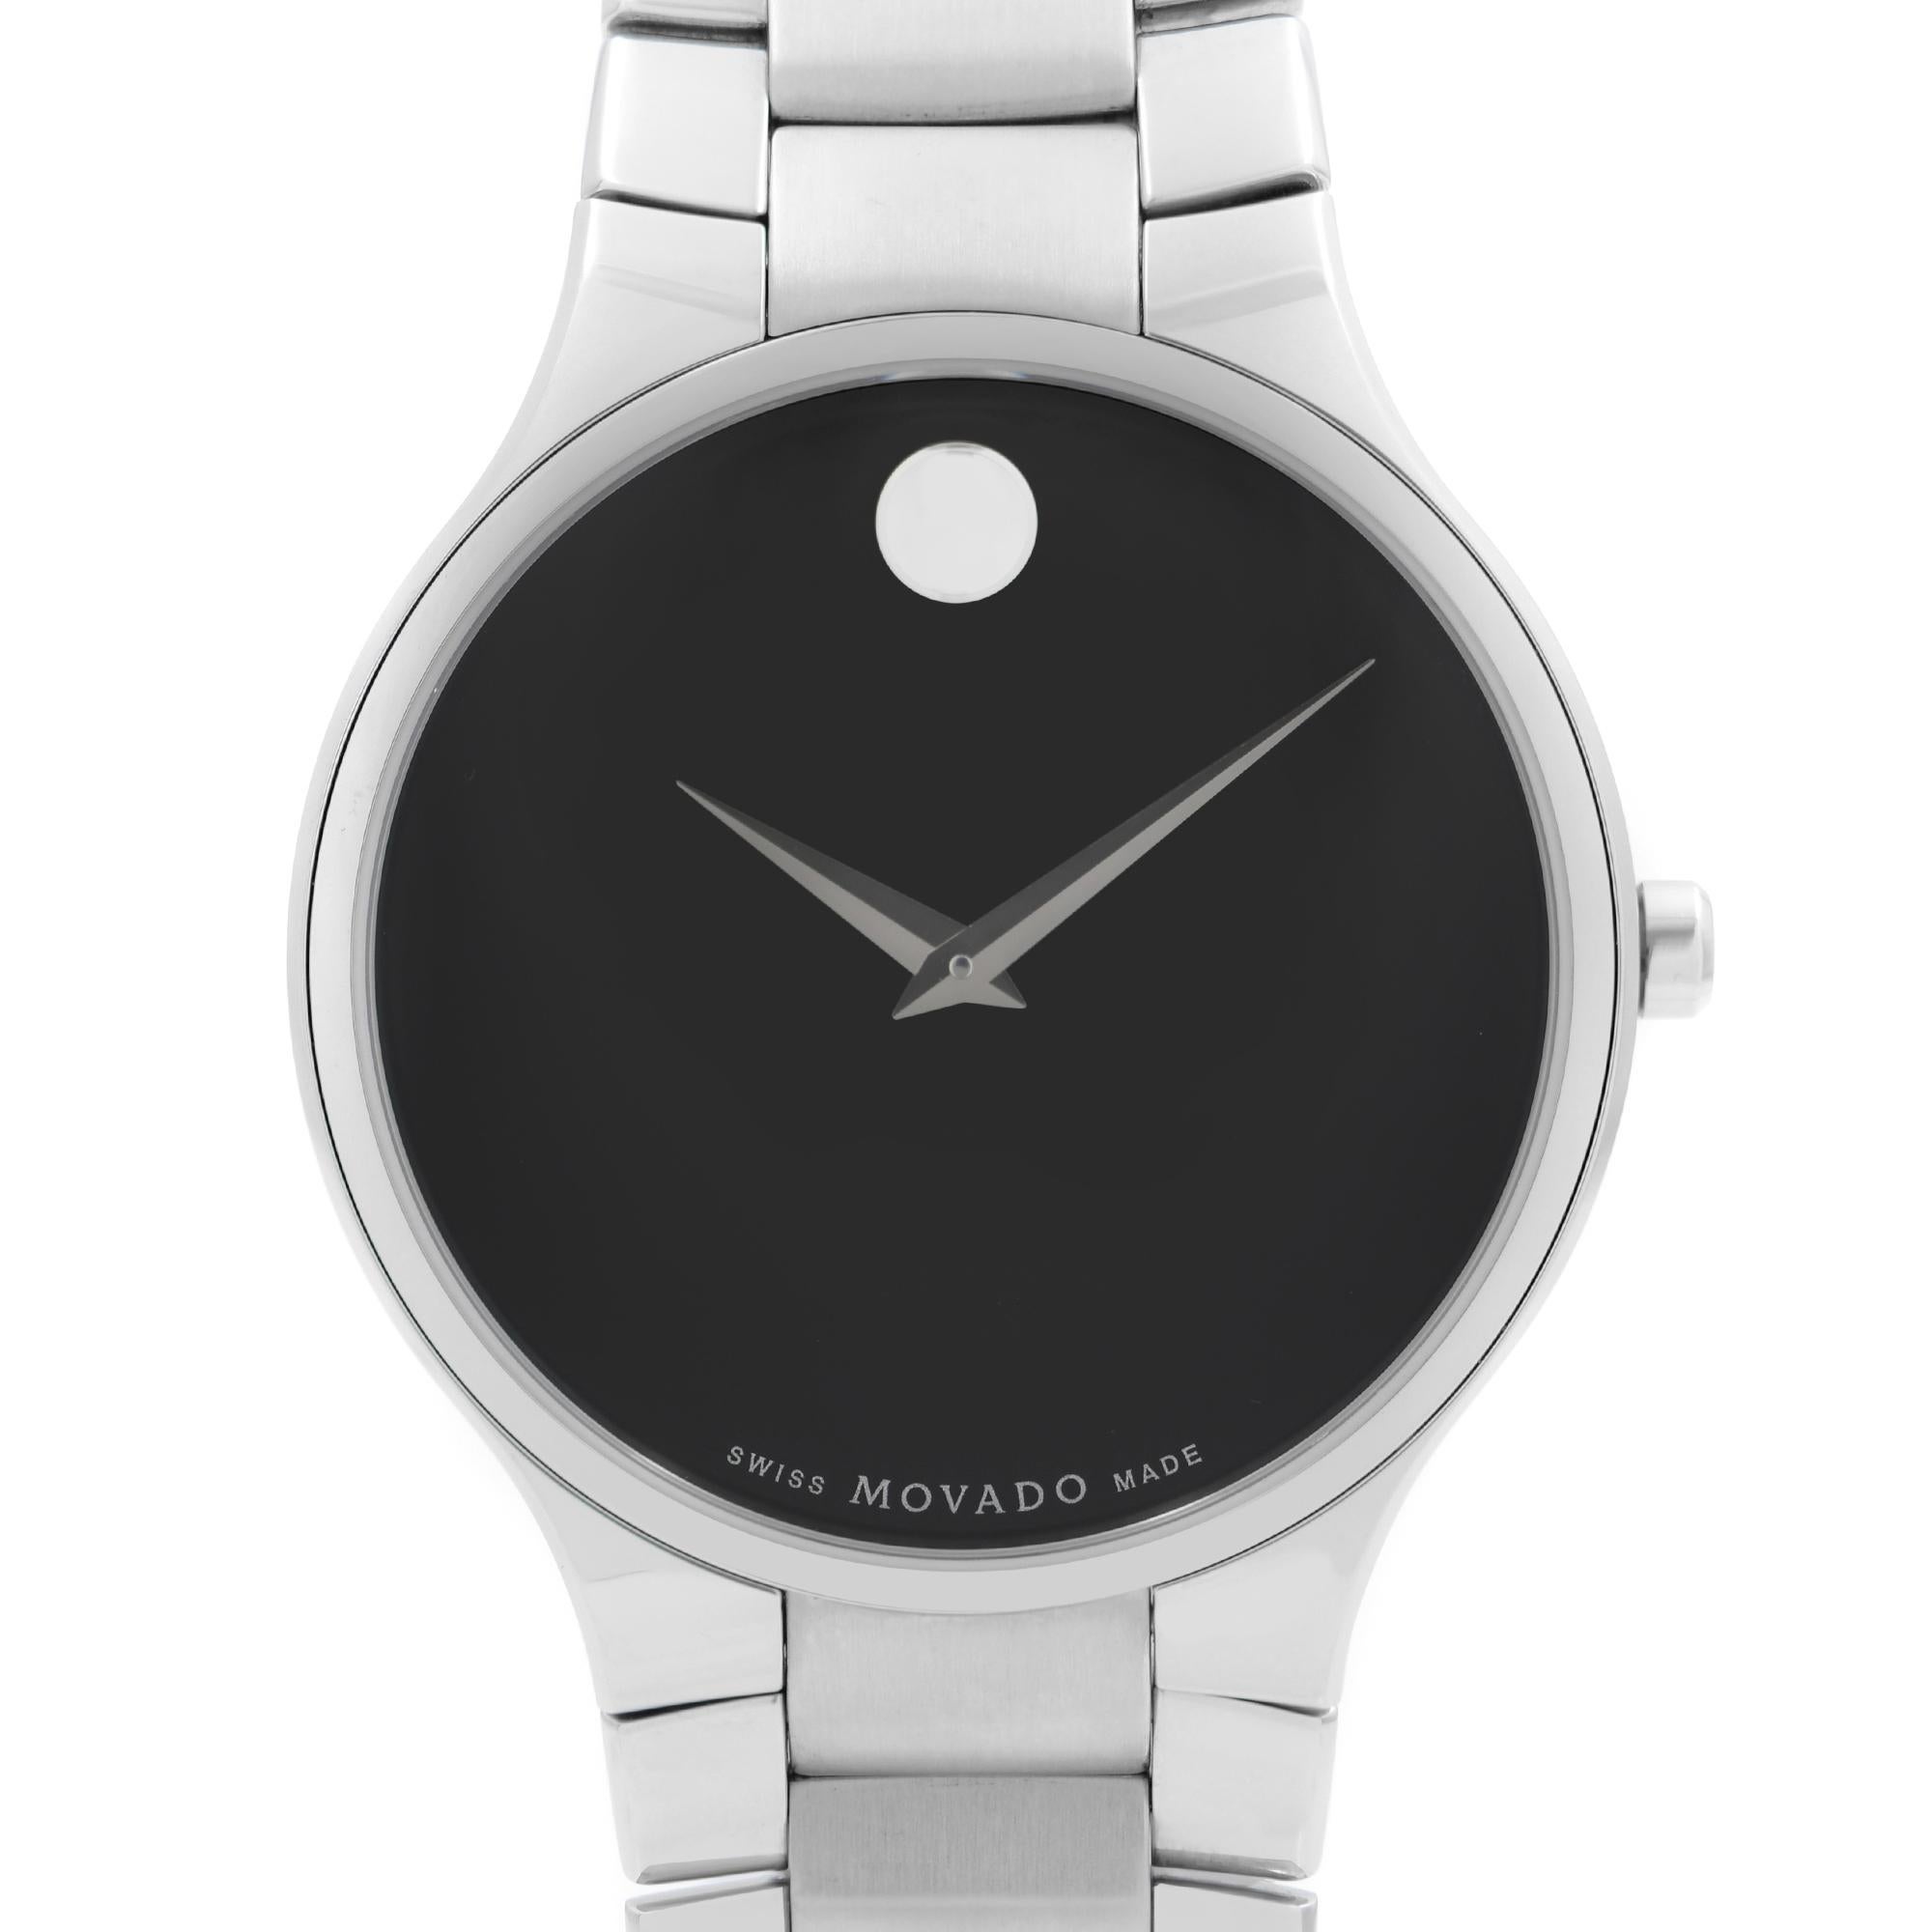 Display Model Movado Serio Black Dial Stainless Steel Men's Watch 0606382. This Beautiful Timepiece Stainless Steel Case with a Stainless Steel bracelet. Fixed Stainless Steel Bezel. Black Dial with Silver-Tone Hands. No markers. Movado Dot Appears